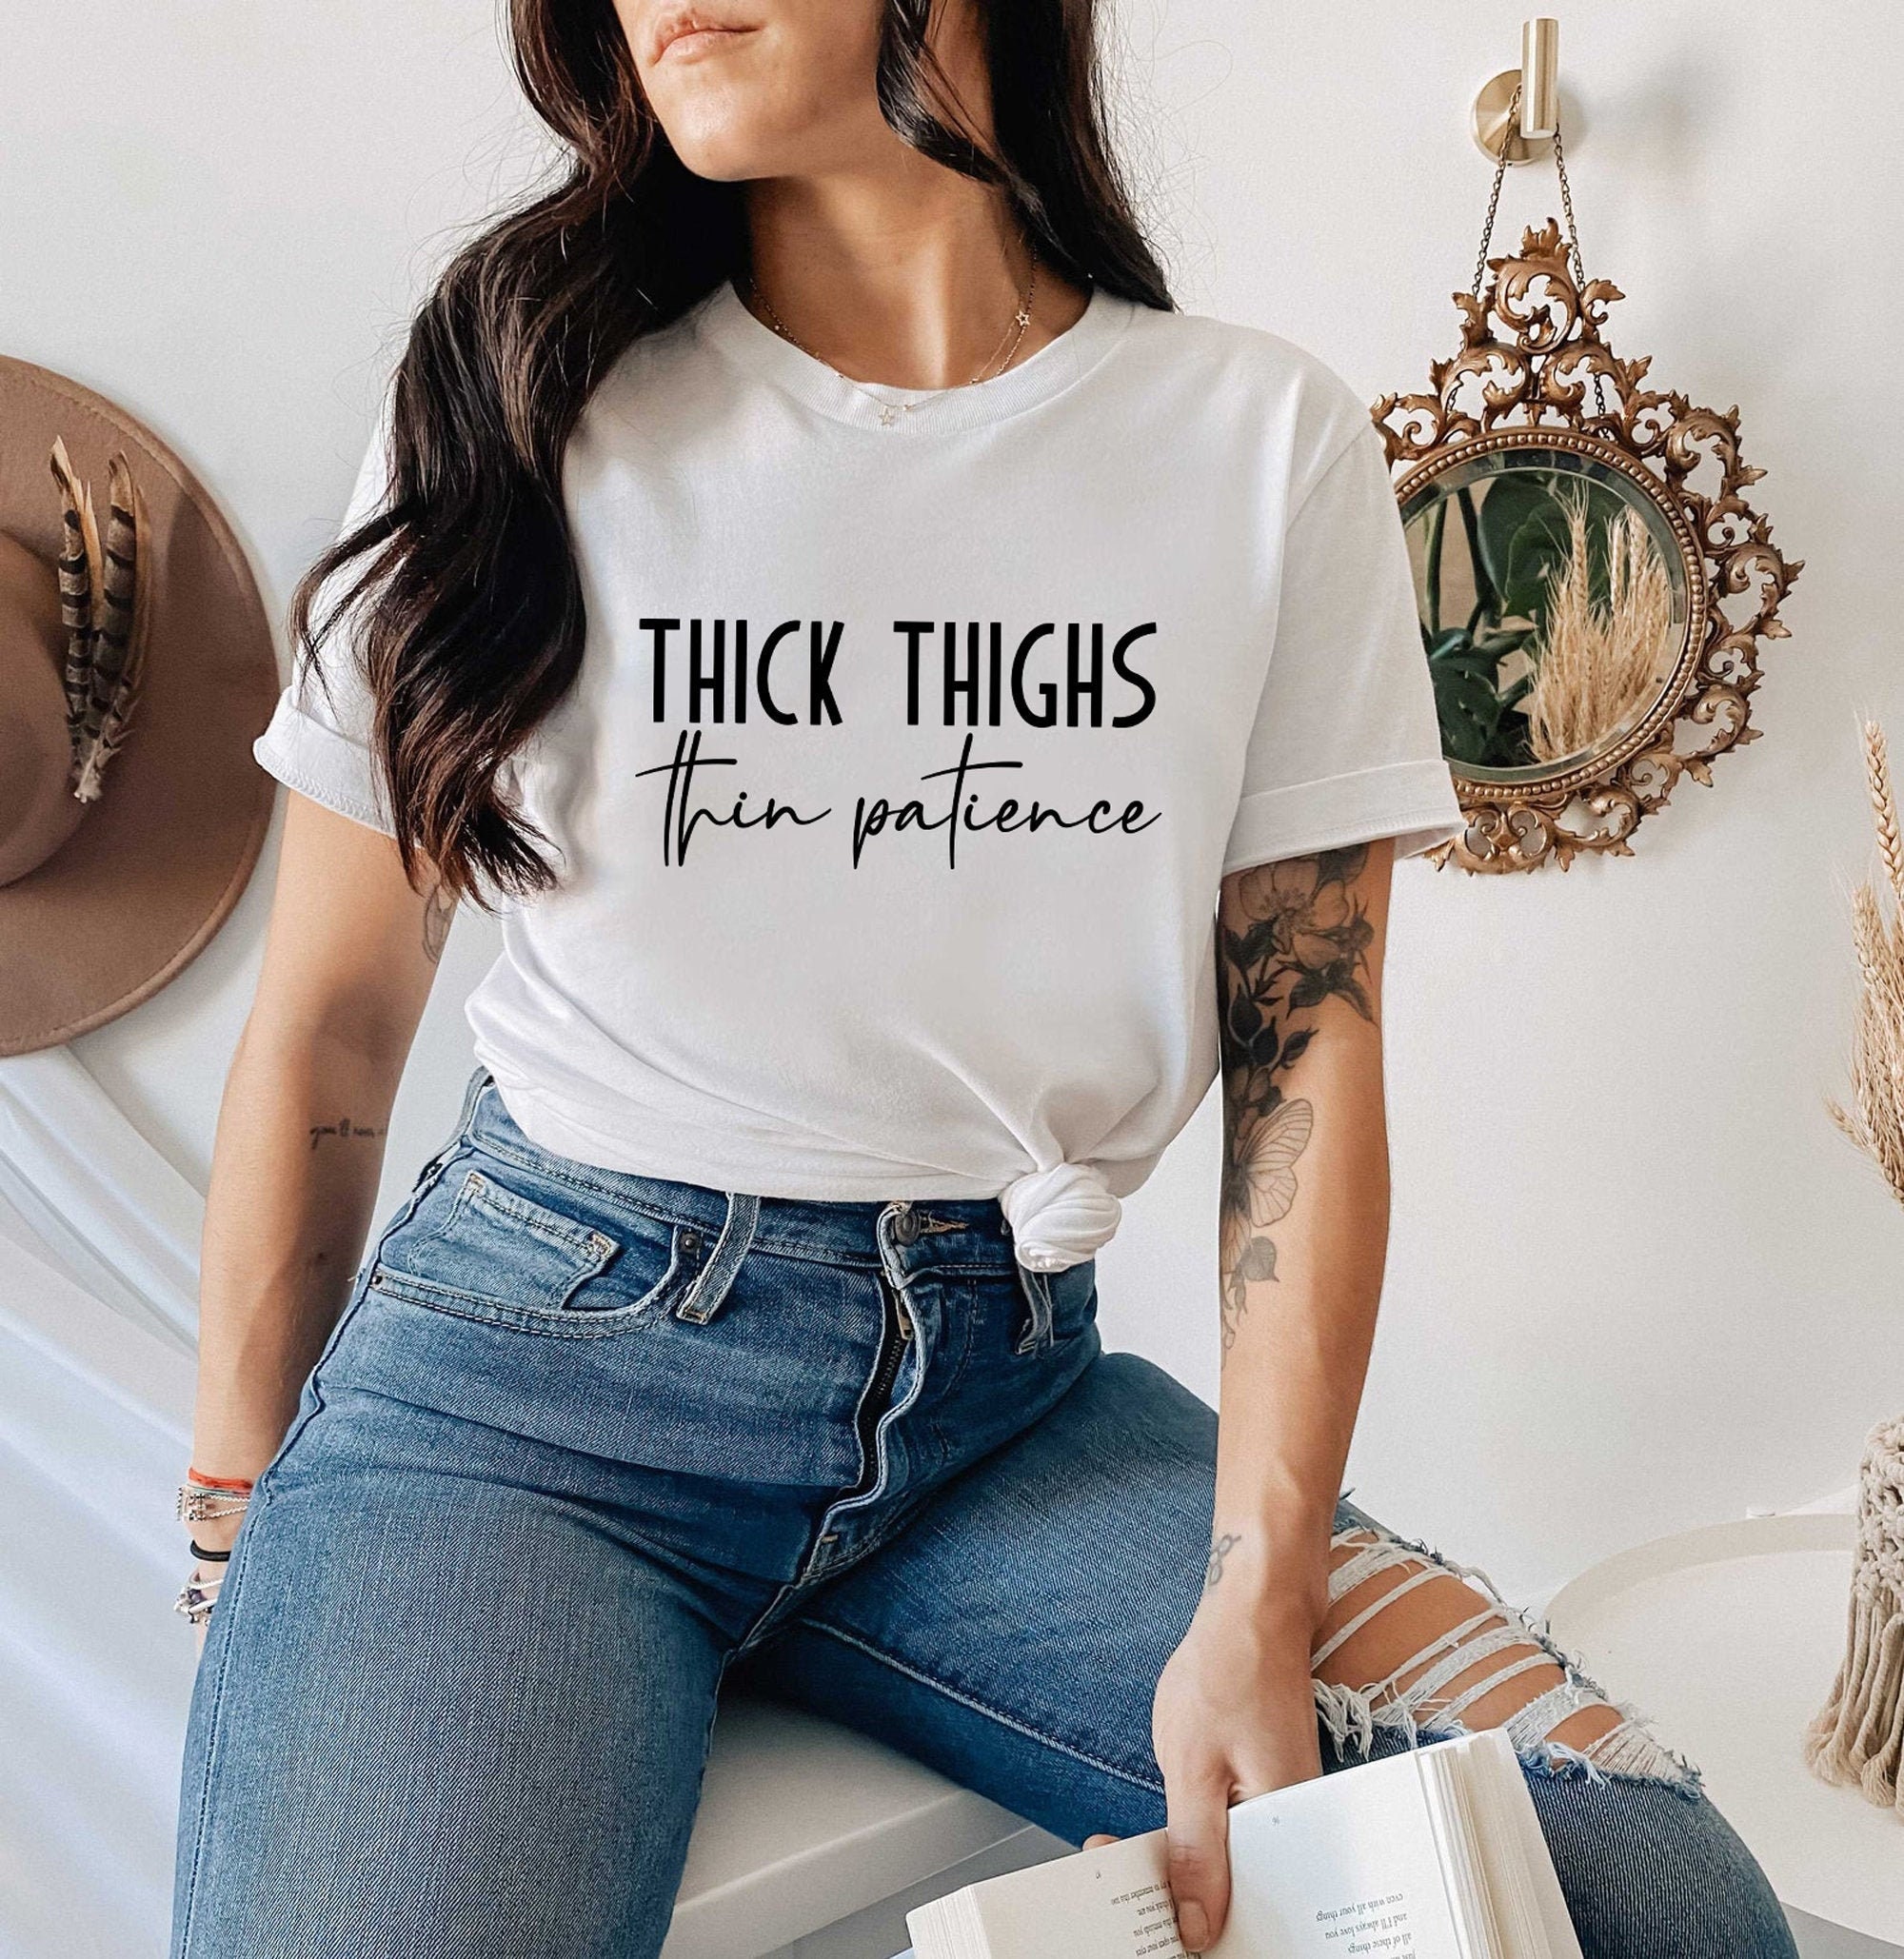 Thick Thighs Thin Patience Shirt sold by Marcelo Martins, SKU 38313195